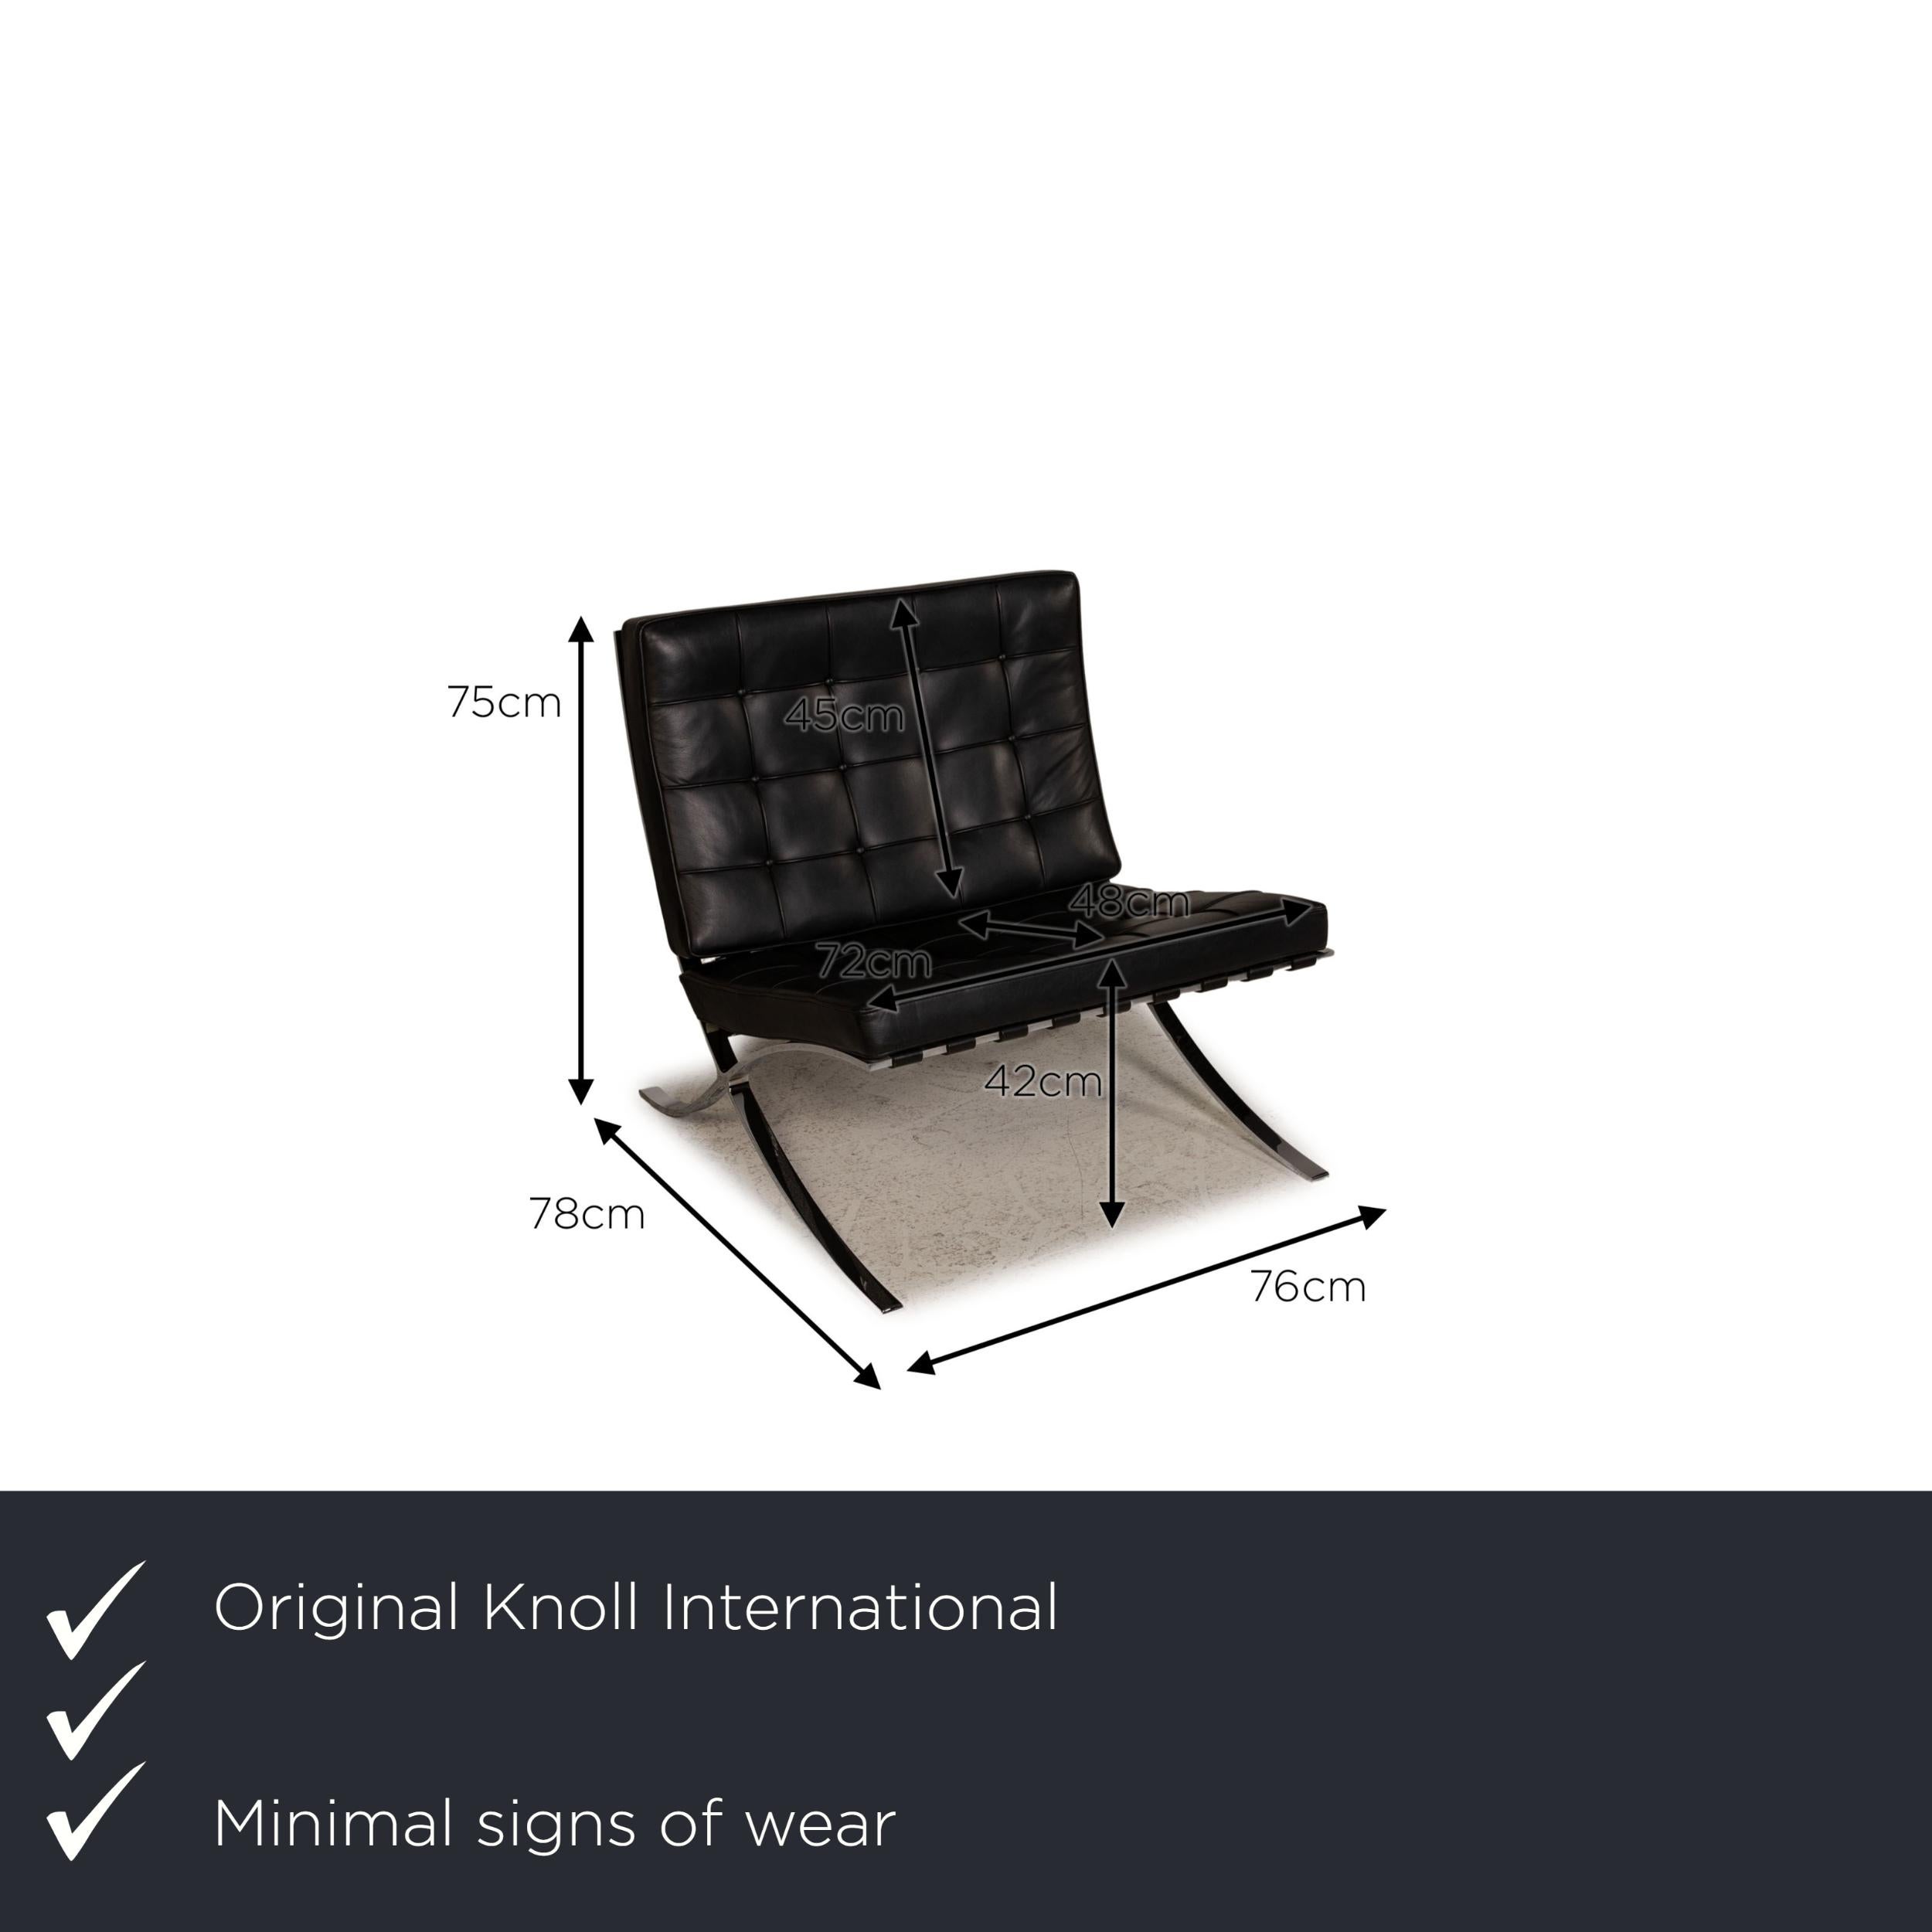 We present to you a Knoll International Barcelona Leather Armchair Black by Ludwig Mies van der Rohe.

Product measurements in centimeters:

depth: 78
width: 76
height: 75
seat height: 42
seat depth: 48
seat width: 72
back height: 45.


